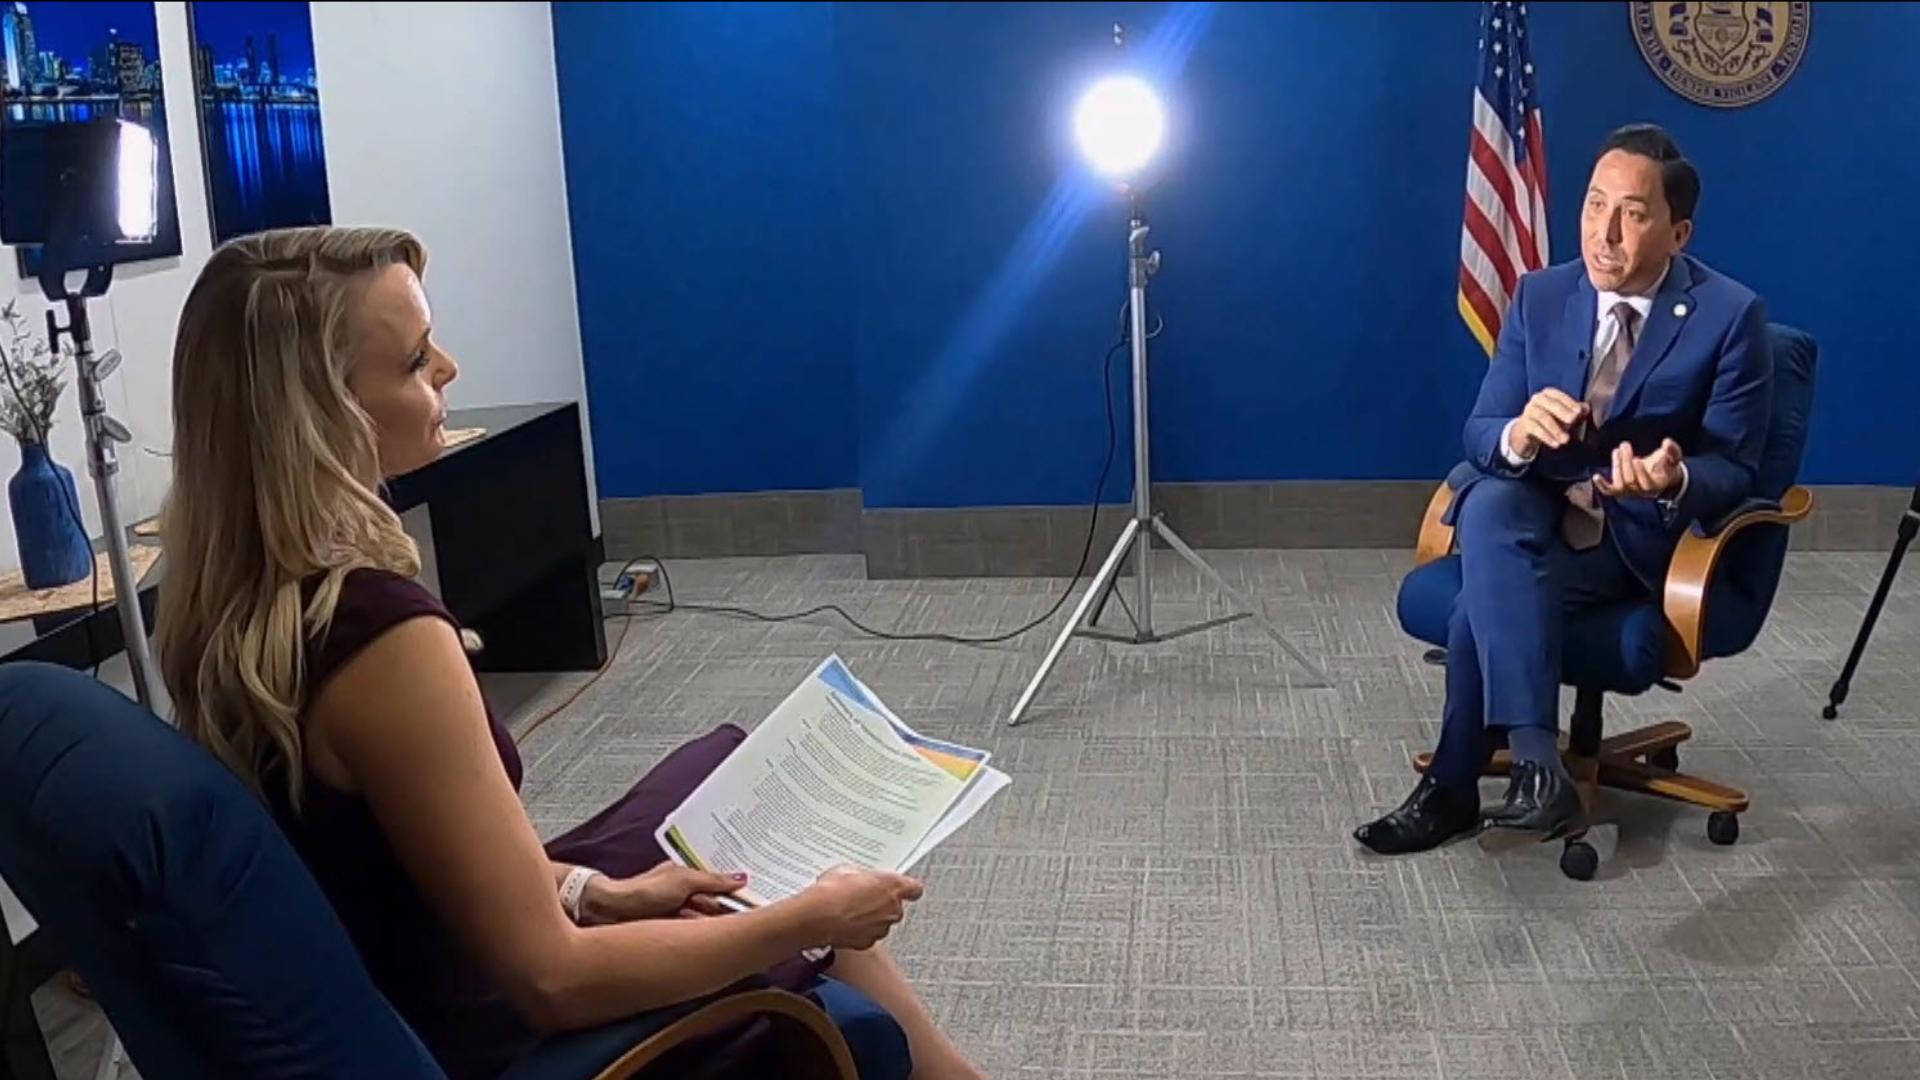 CBS 8's Shannon Handy sat down with San Diego Mayor Todd Gloria to discuss San Diego's homelessness crisis.